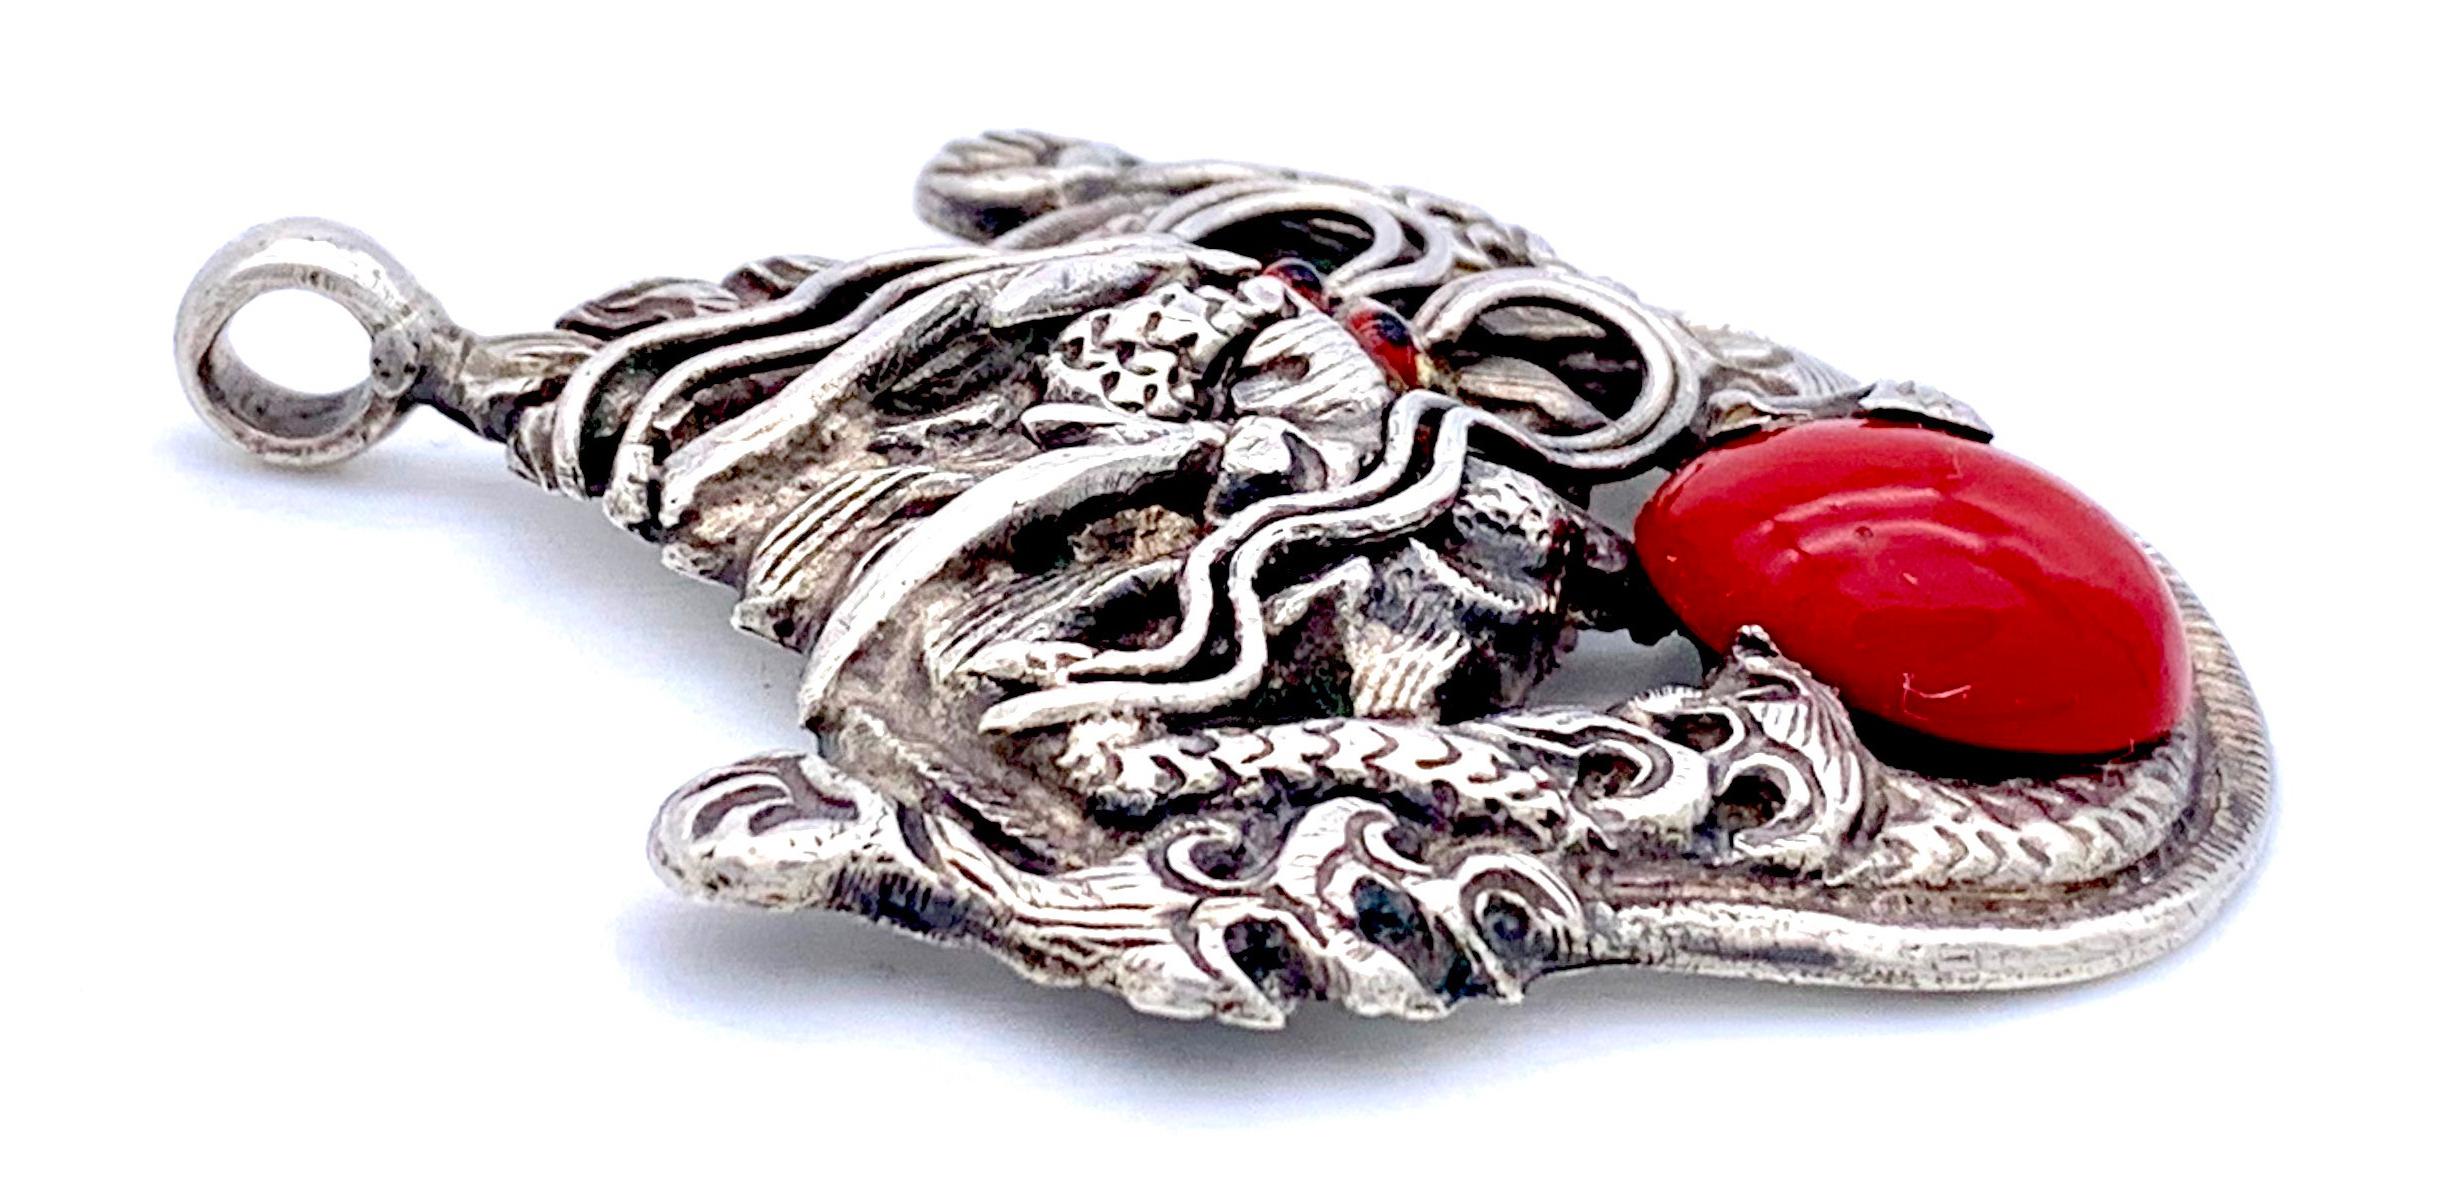 This expressive silver Chinese pendant features a dragon holding a red glass cabochon in his claws. The dragons eyes are made out of red and black glas.